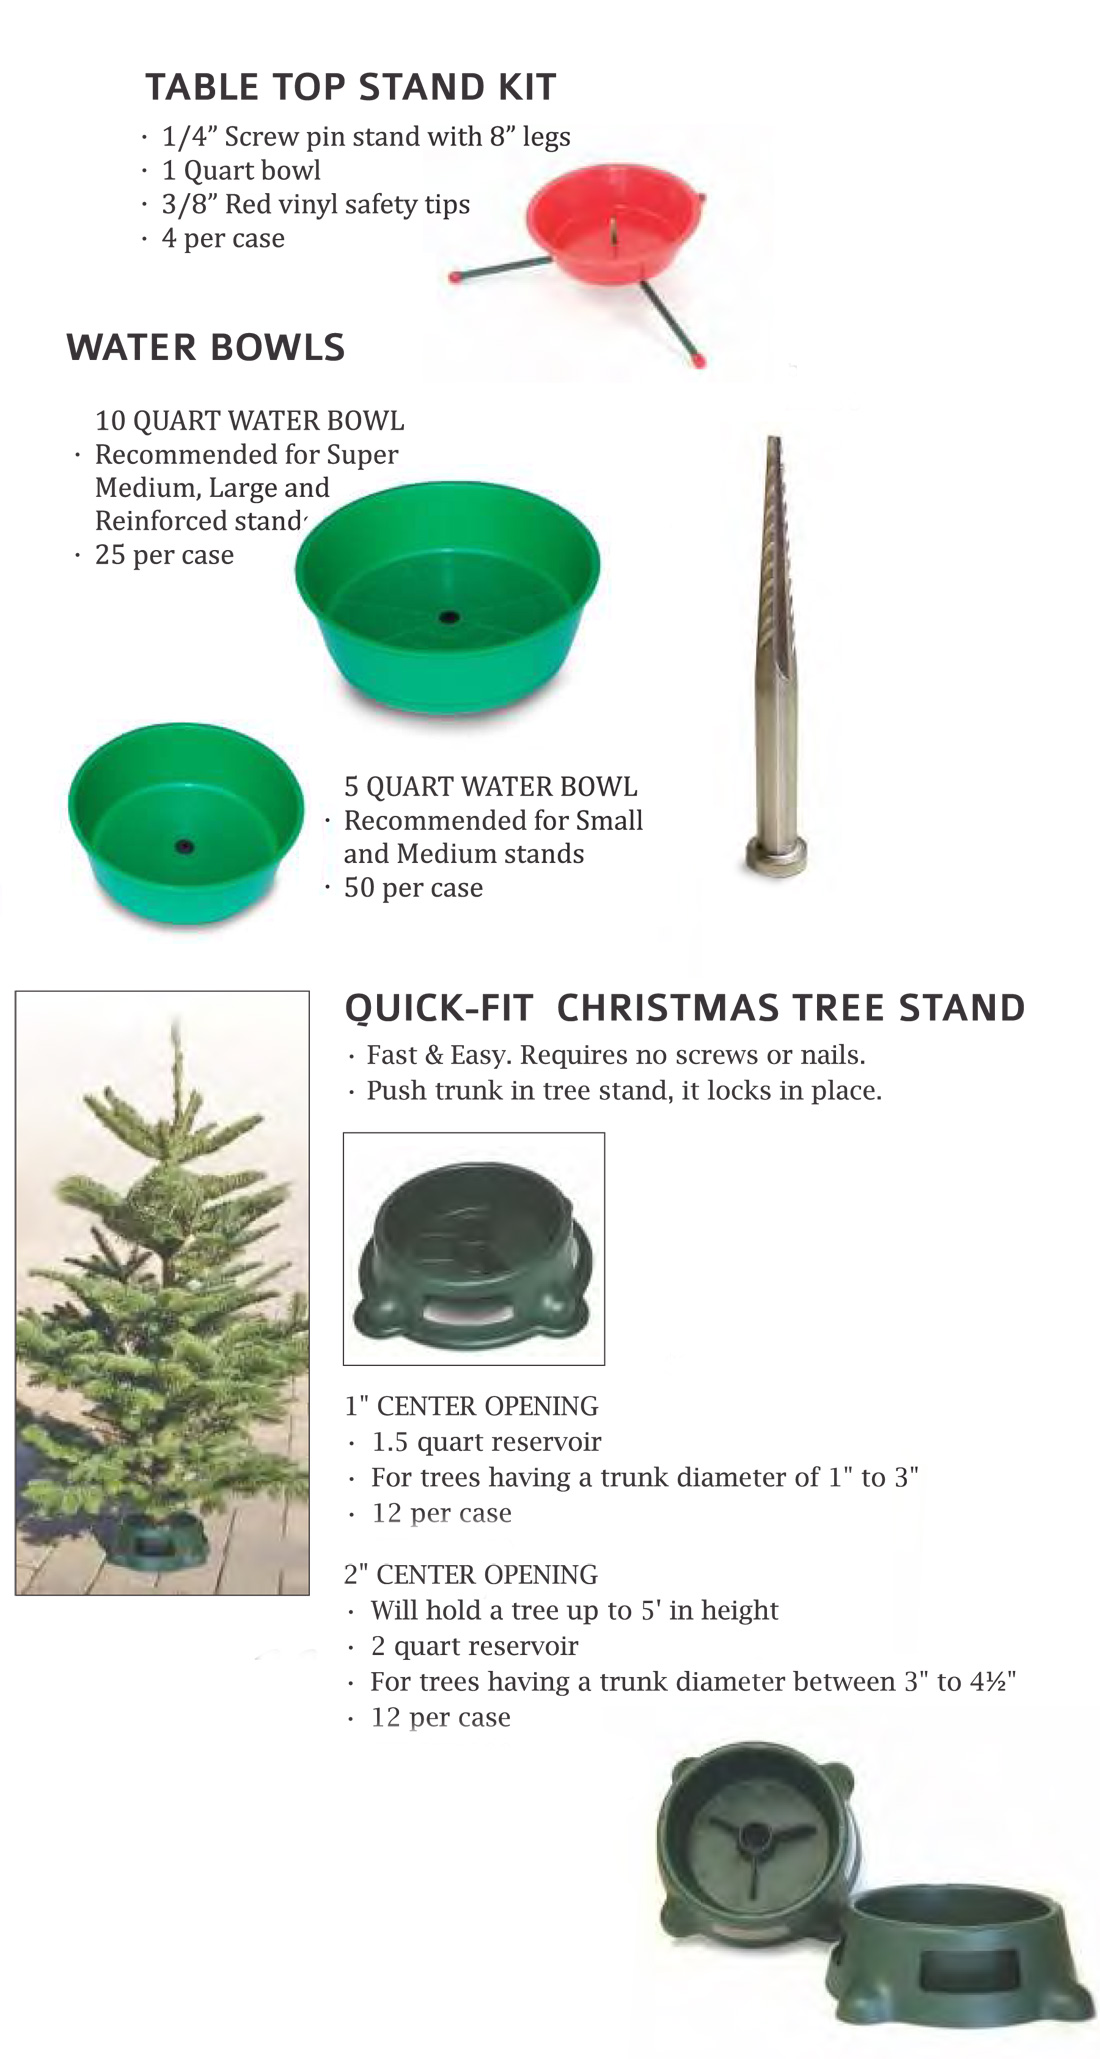 Christmas Tree Stand Information